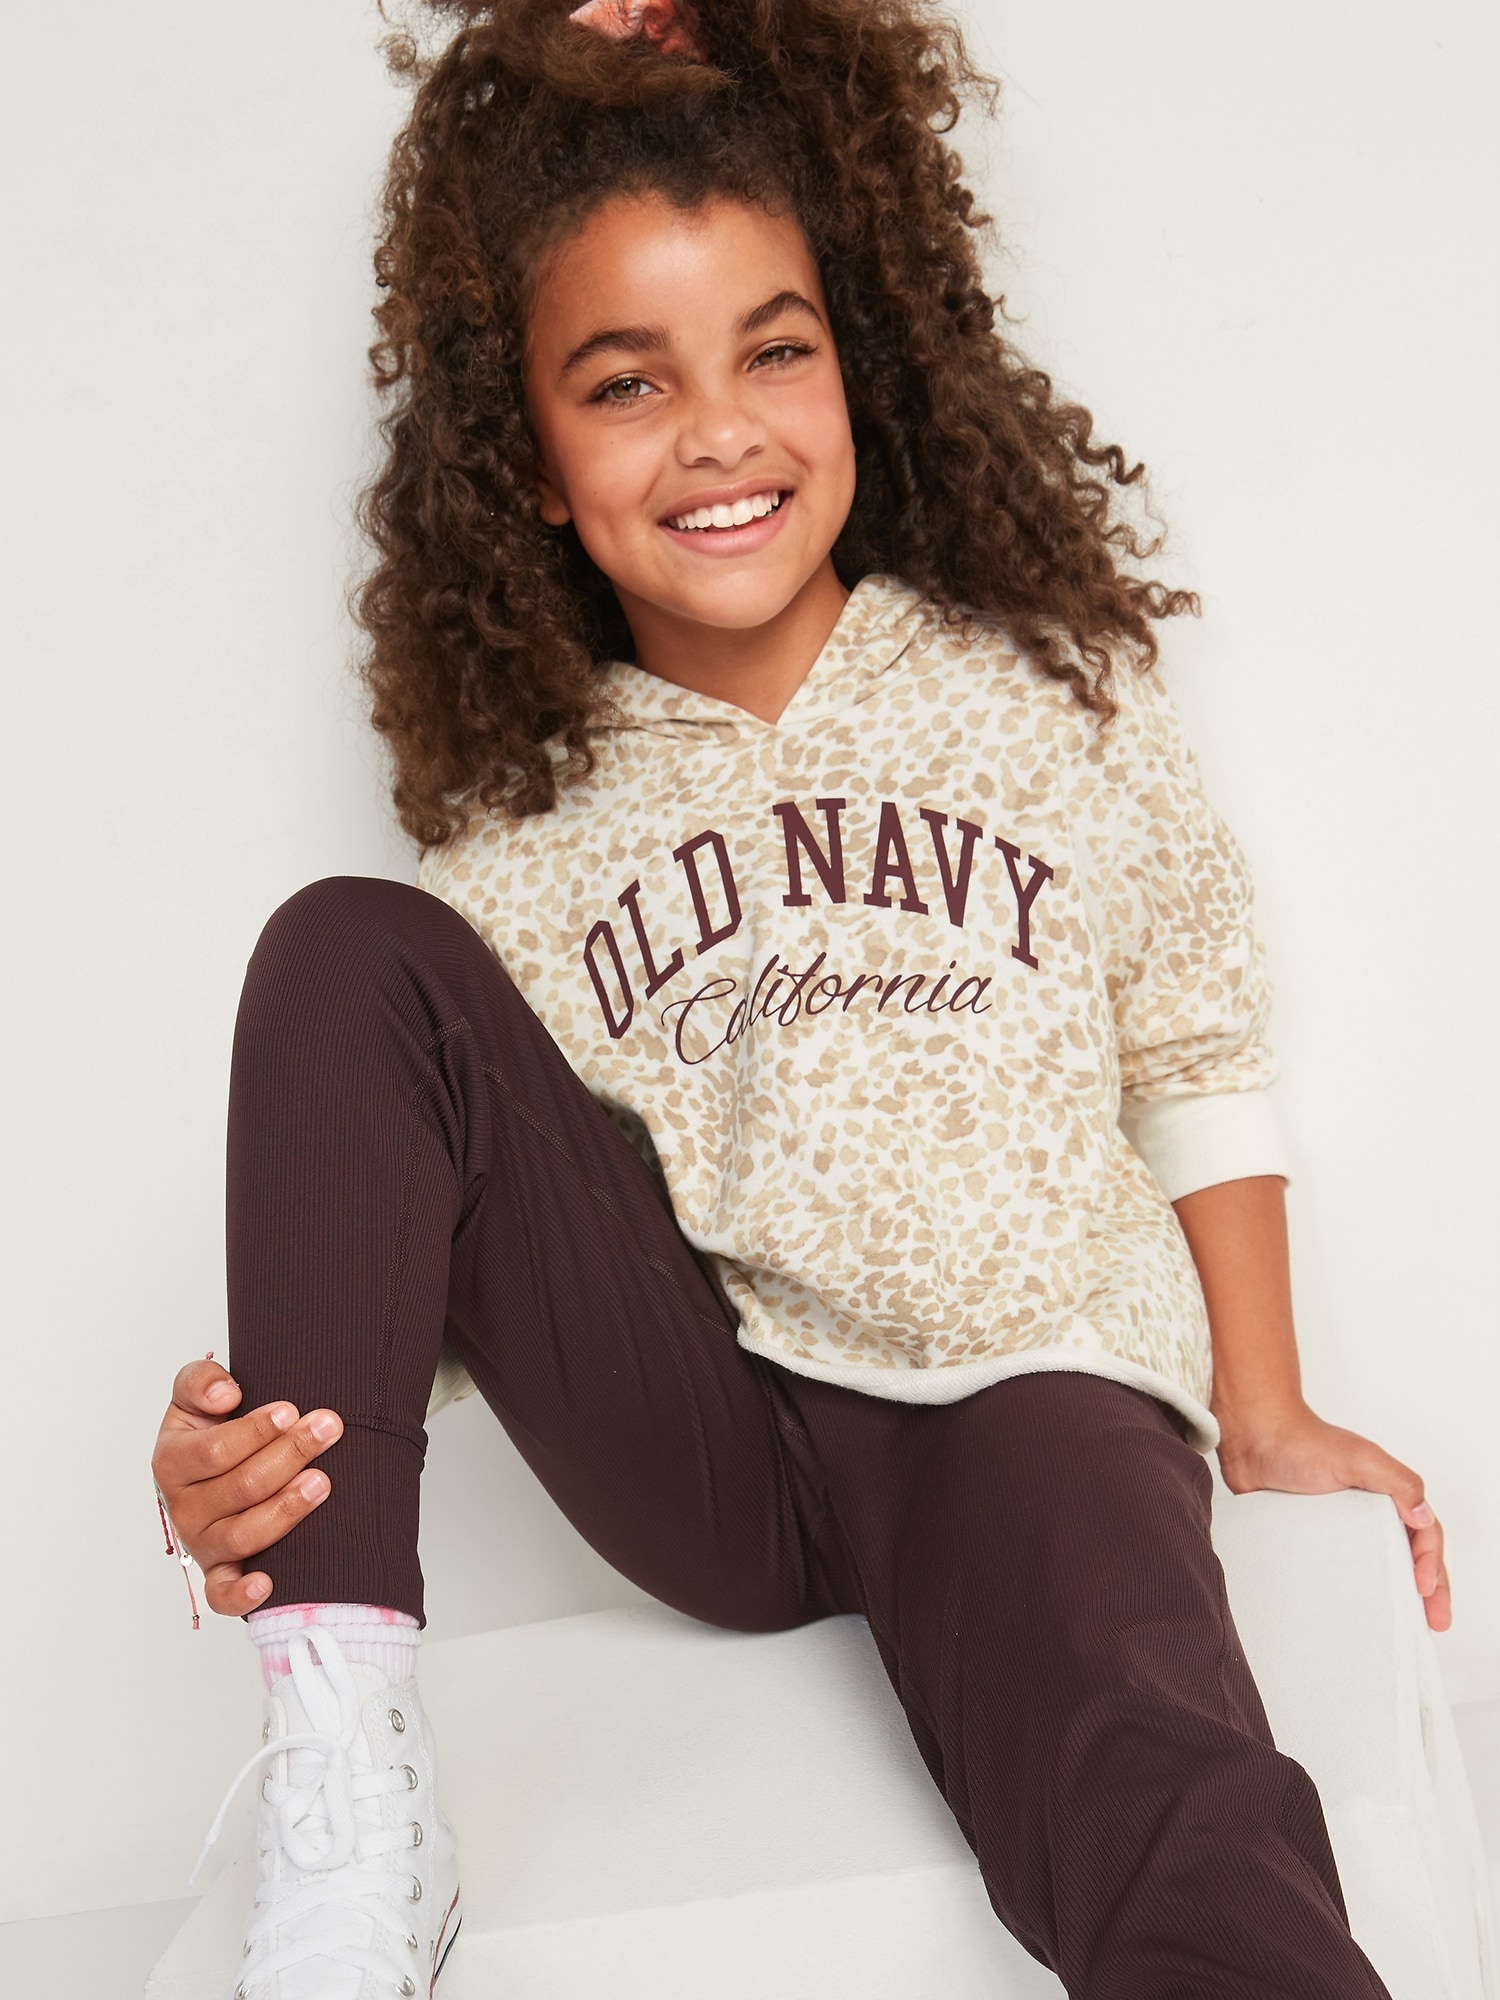 Slouchy Cropped Raw-Hem Logo-Graphic Hoodie for Girls